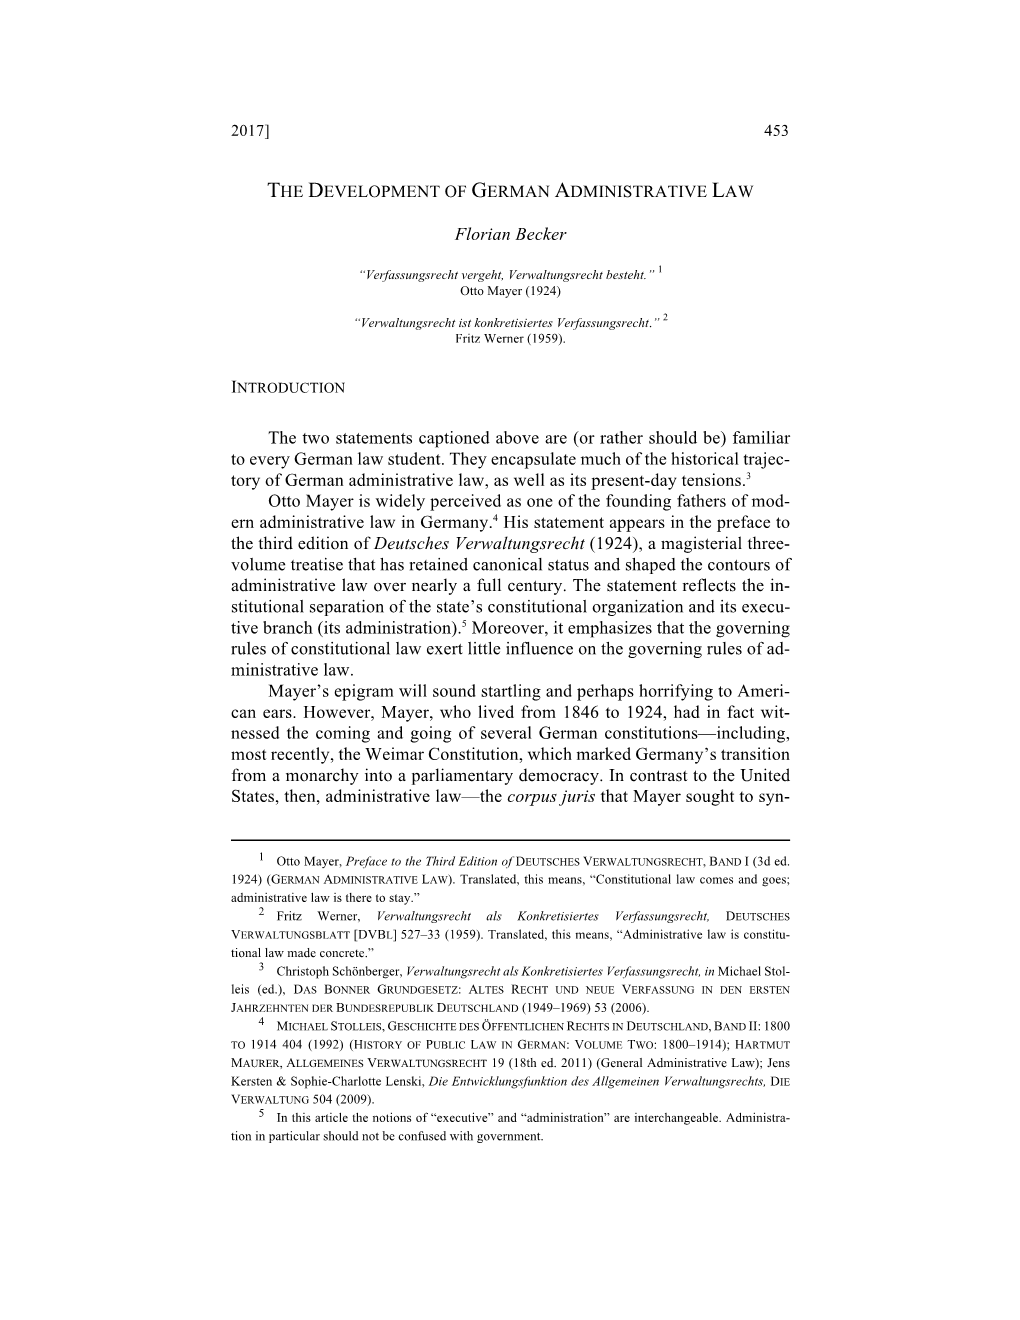 The Development of German Administrative Law